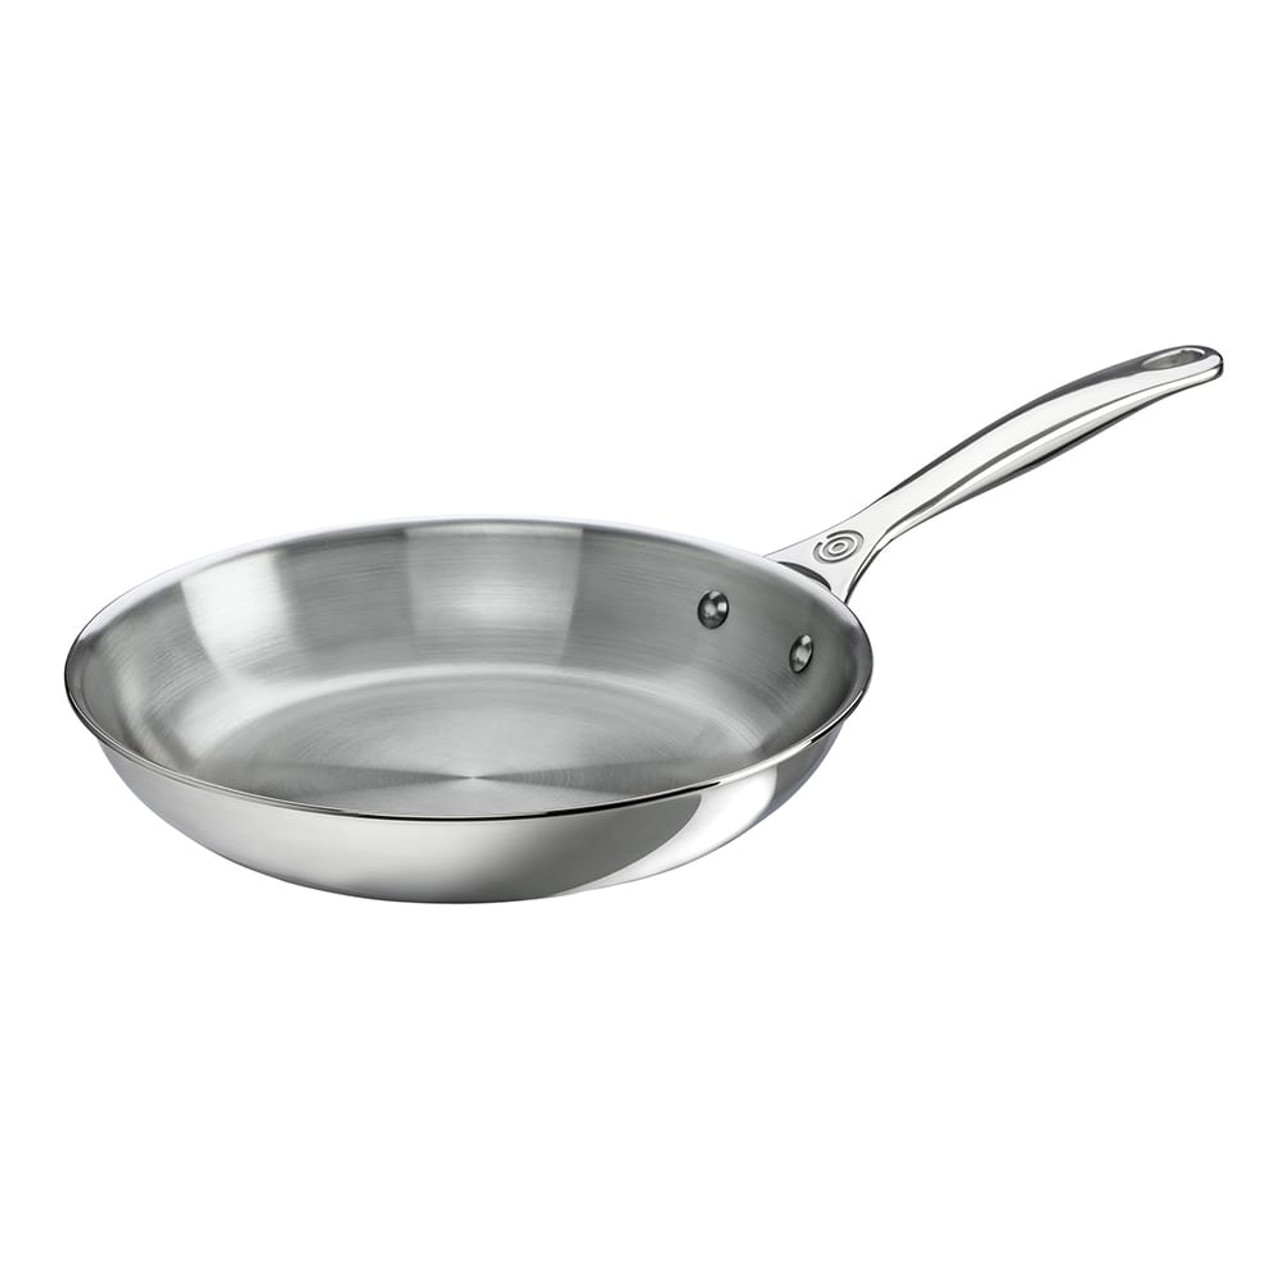 https://cdn11.bigcommerce.com/s-hccytny0od/images/stencil/1280x1280/products/3925/14290/le-creuset-stainless-steel-fry-pan-10in__89237.1612875180.jpg?c=2?imbypass=on